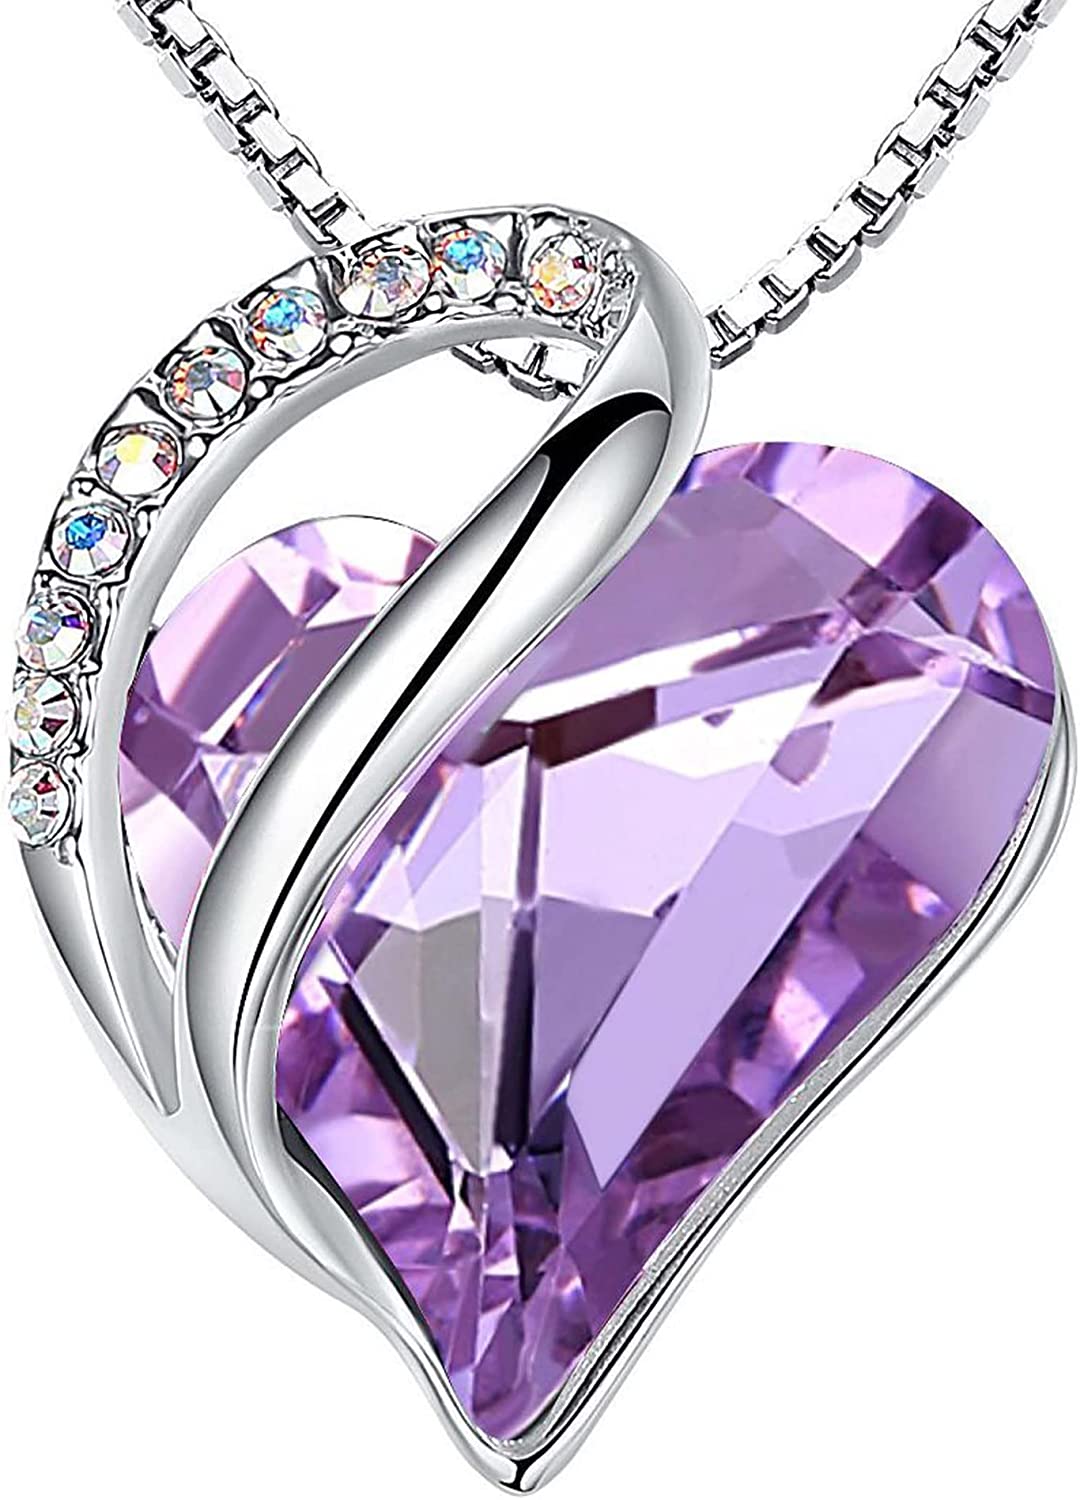 trusted online jewelry stores